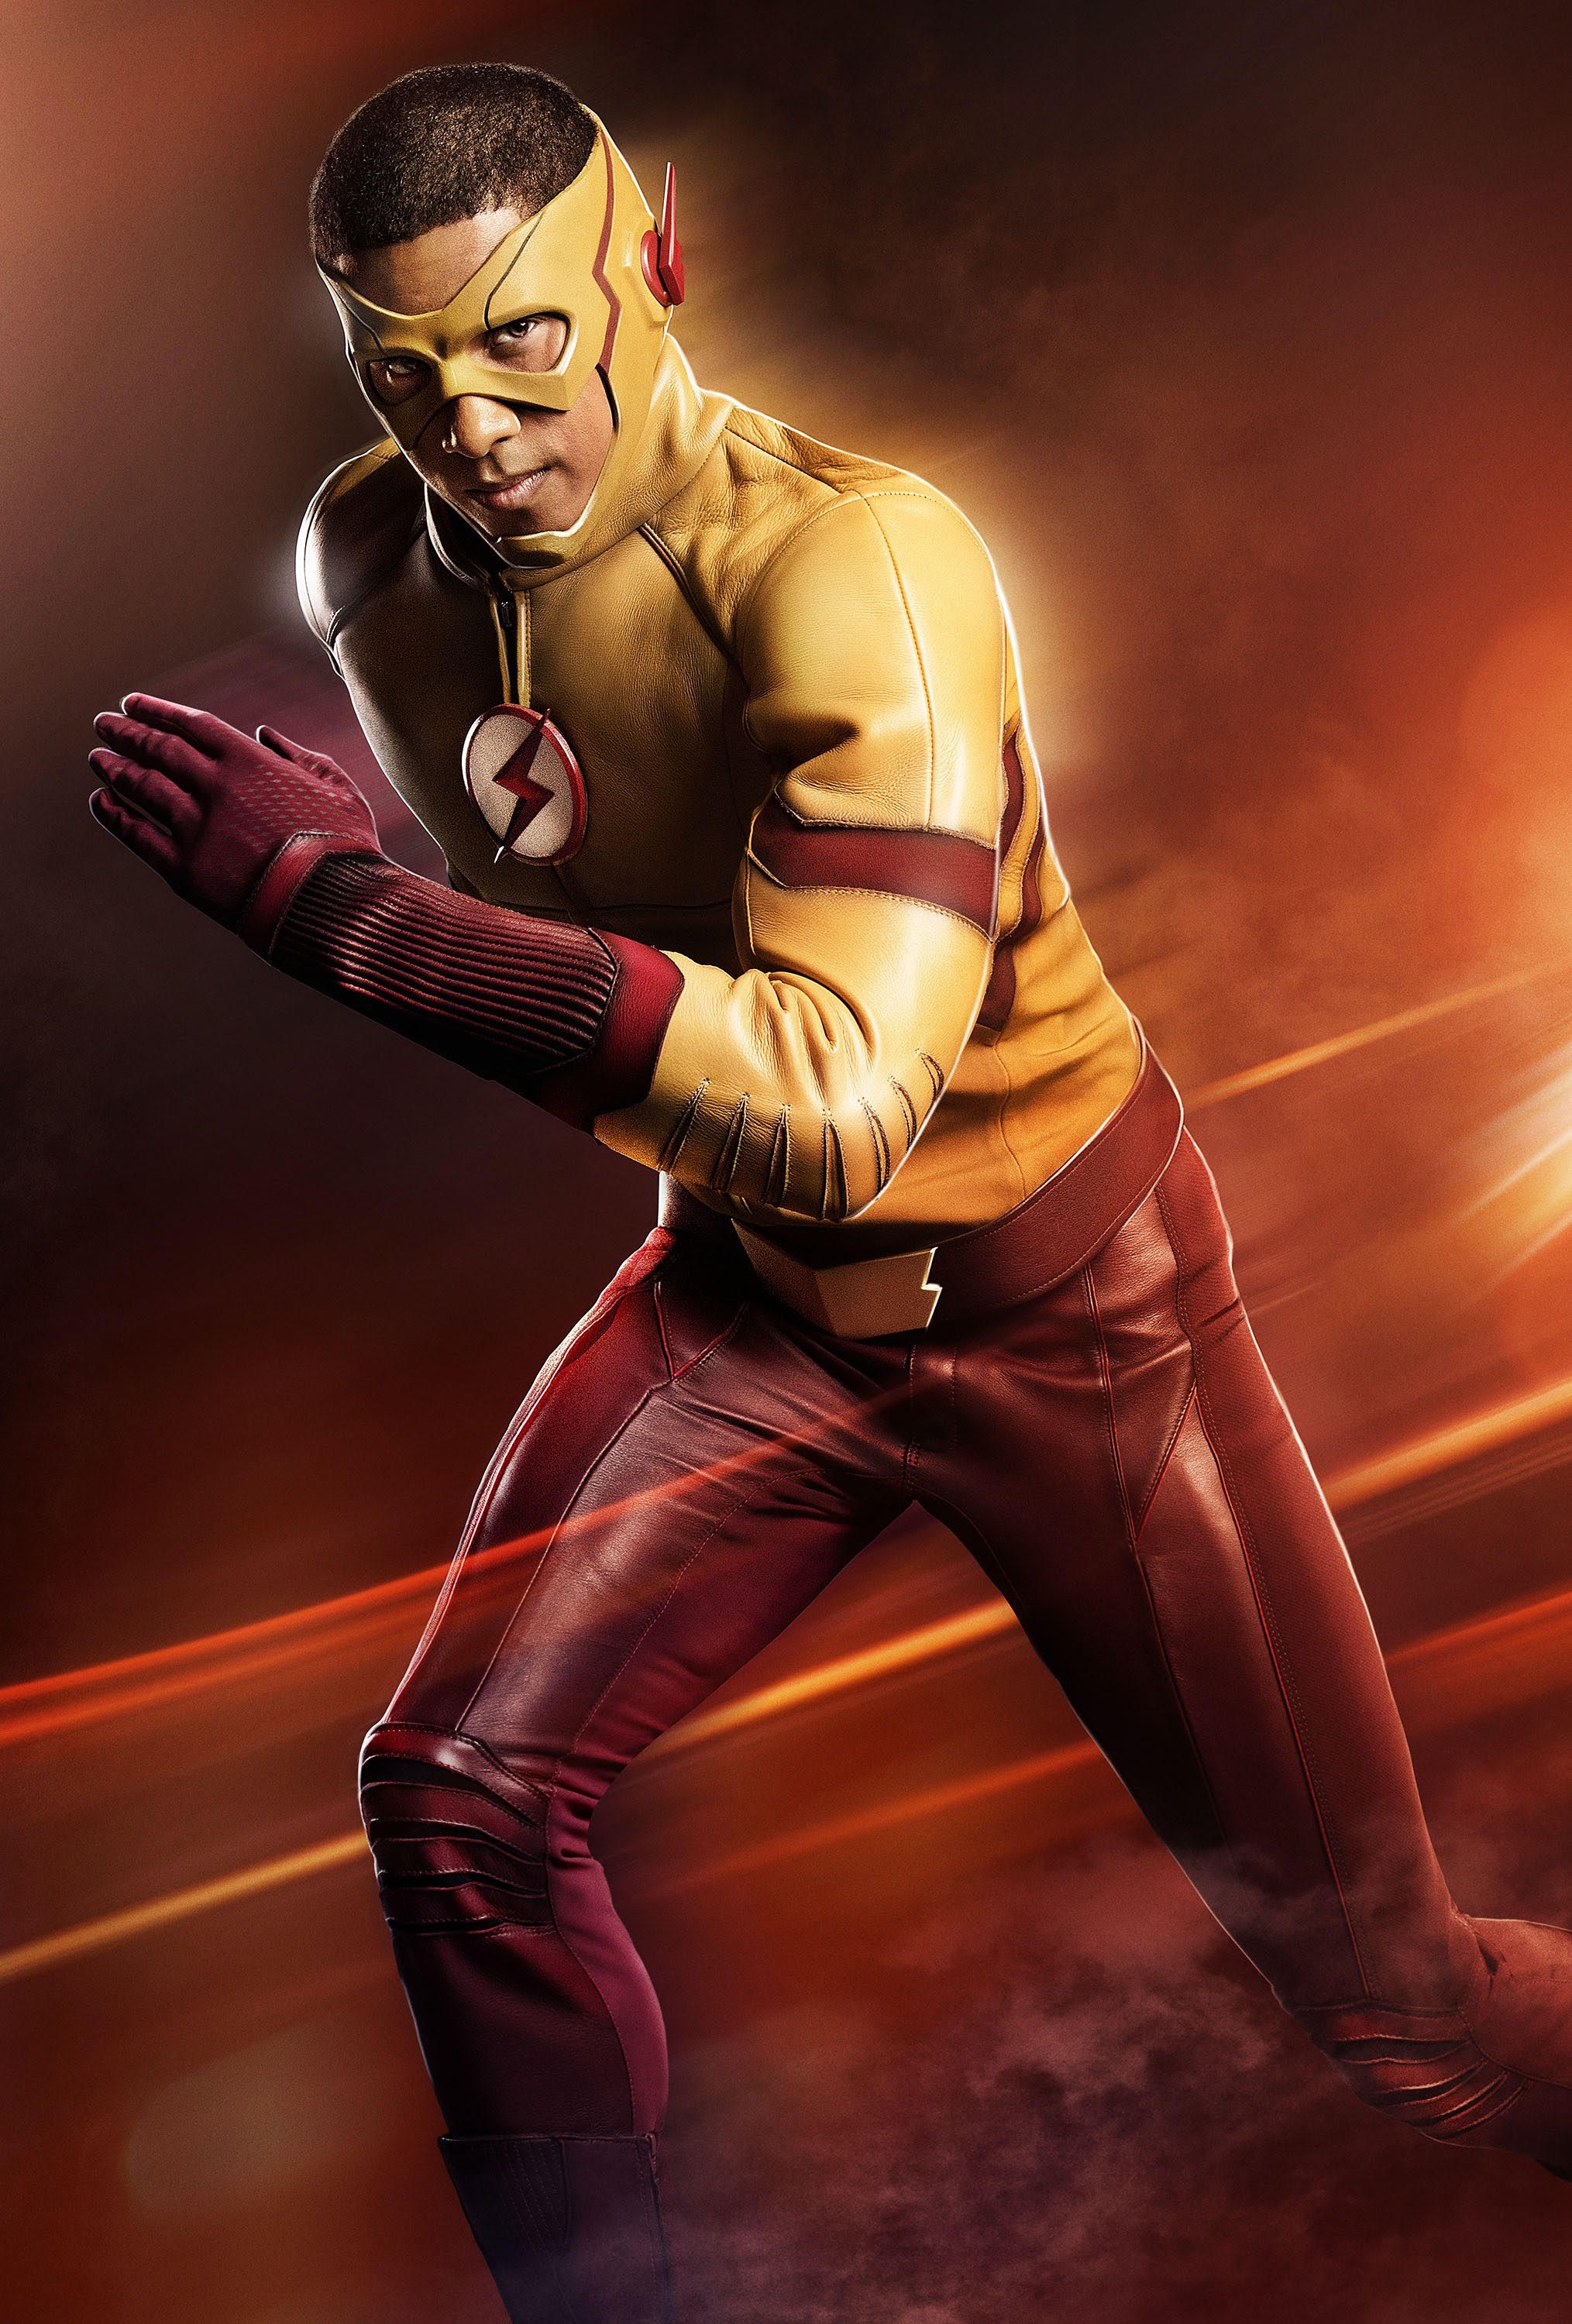 The Flash's Wally West will join DC's Legends of Tomorrow